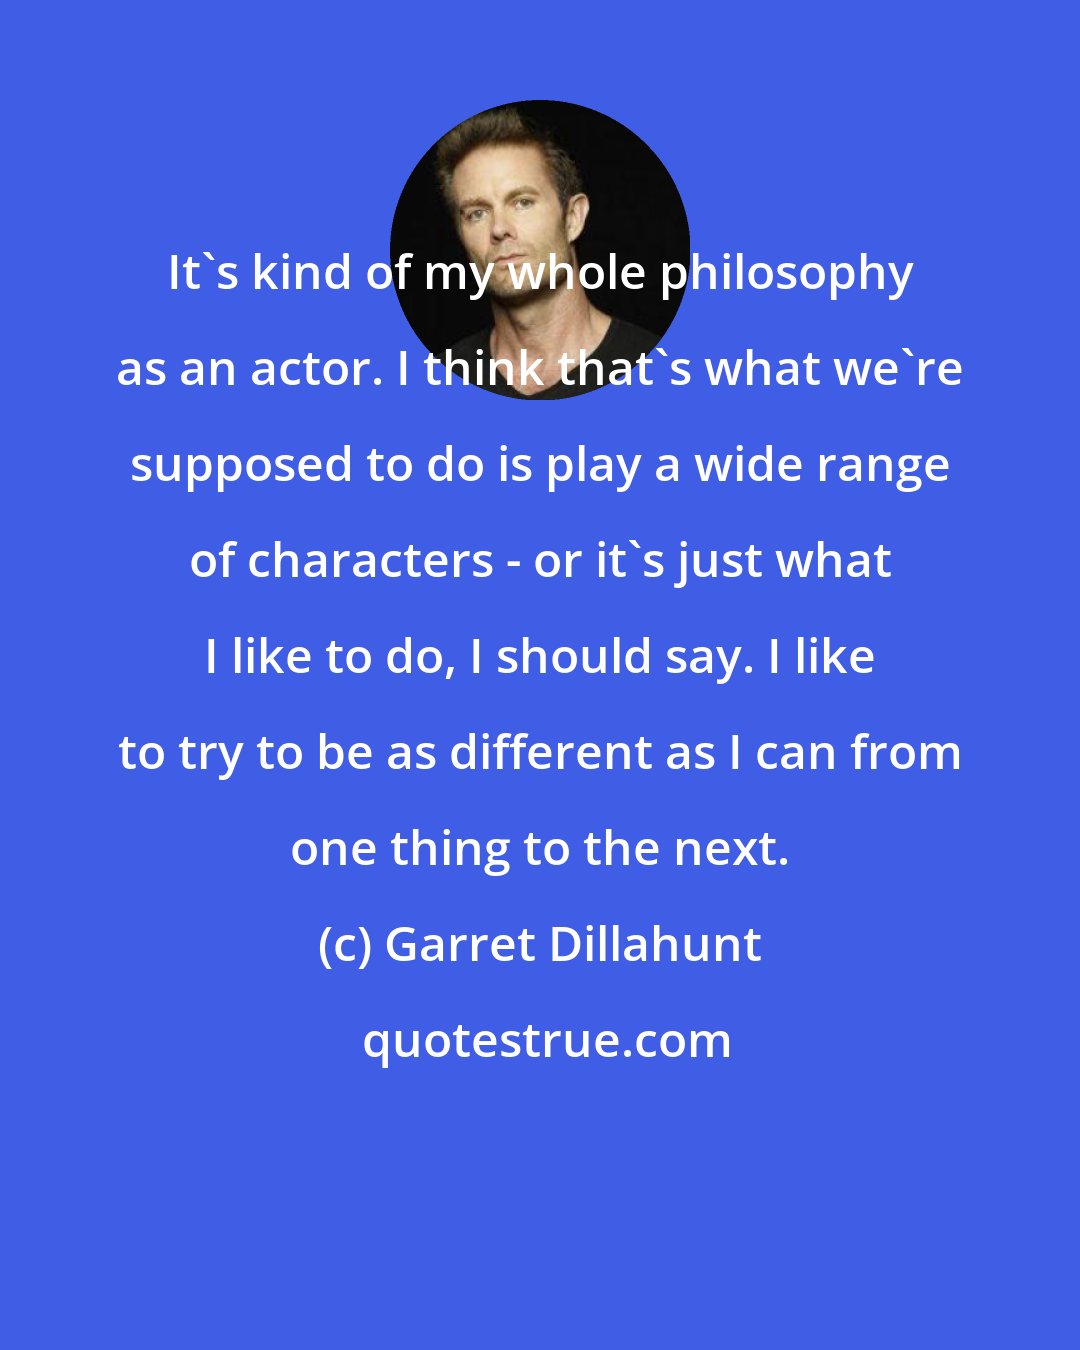 Garret Dillahunt: It's kind of my whole philosophy as an actor. I think that's what we're supposed to do is play a wide range of characters - or it's just what I like to do, I should say. I like to try to be as different as I can from one thing to the next.